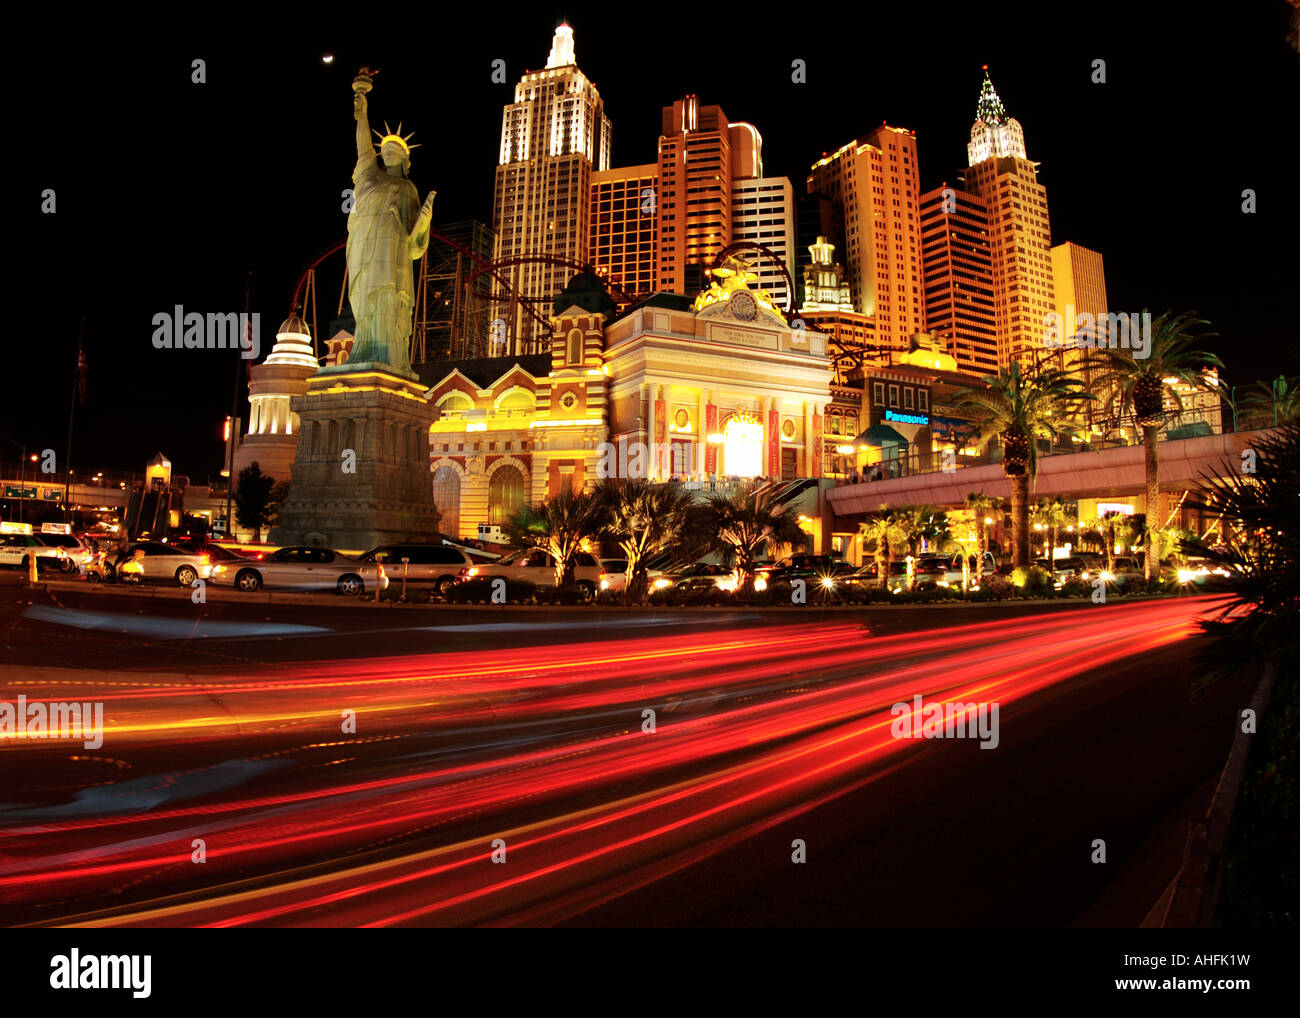 Car tail lights zoom along the strip past New York New York hotel and casino Las Vegas Stock Photo